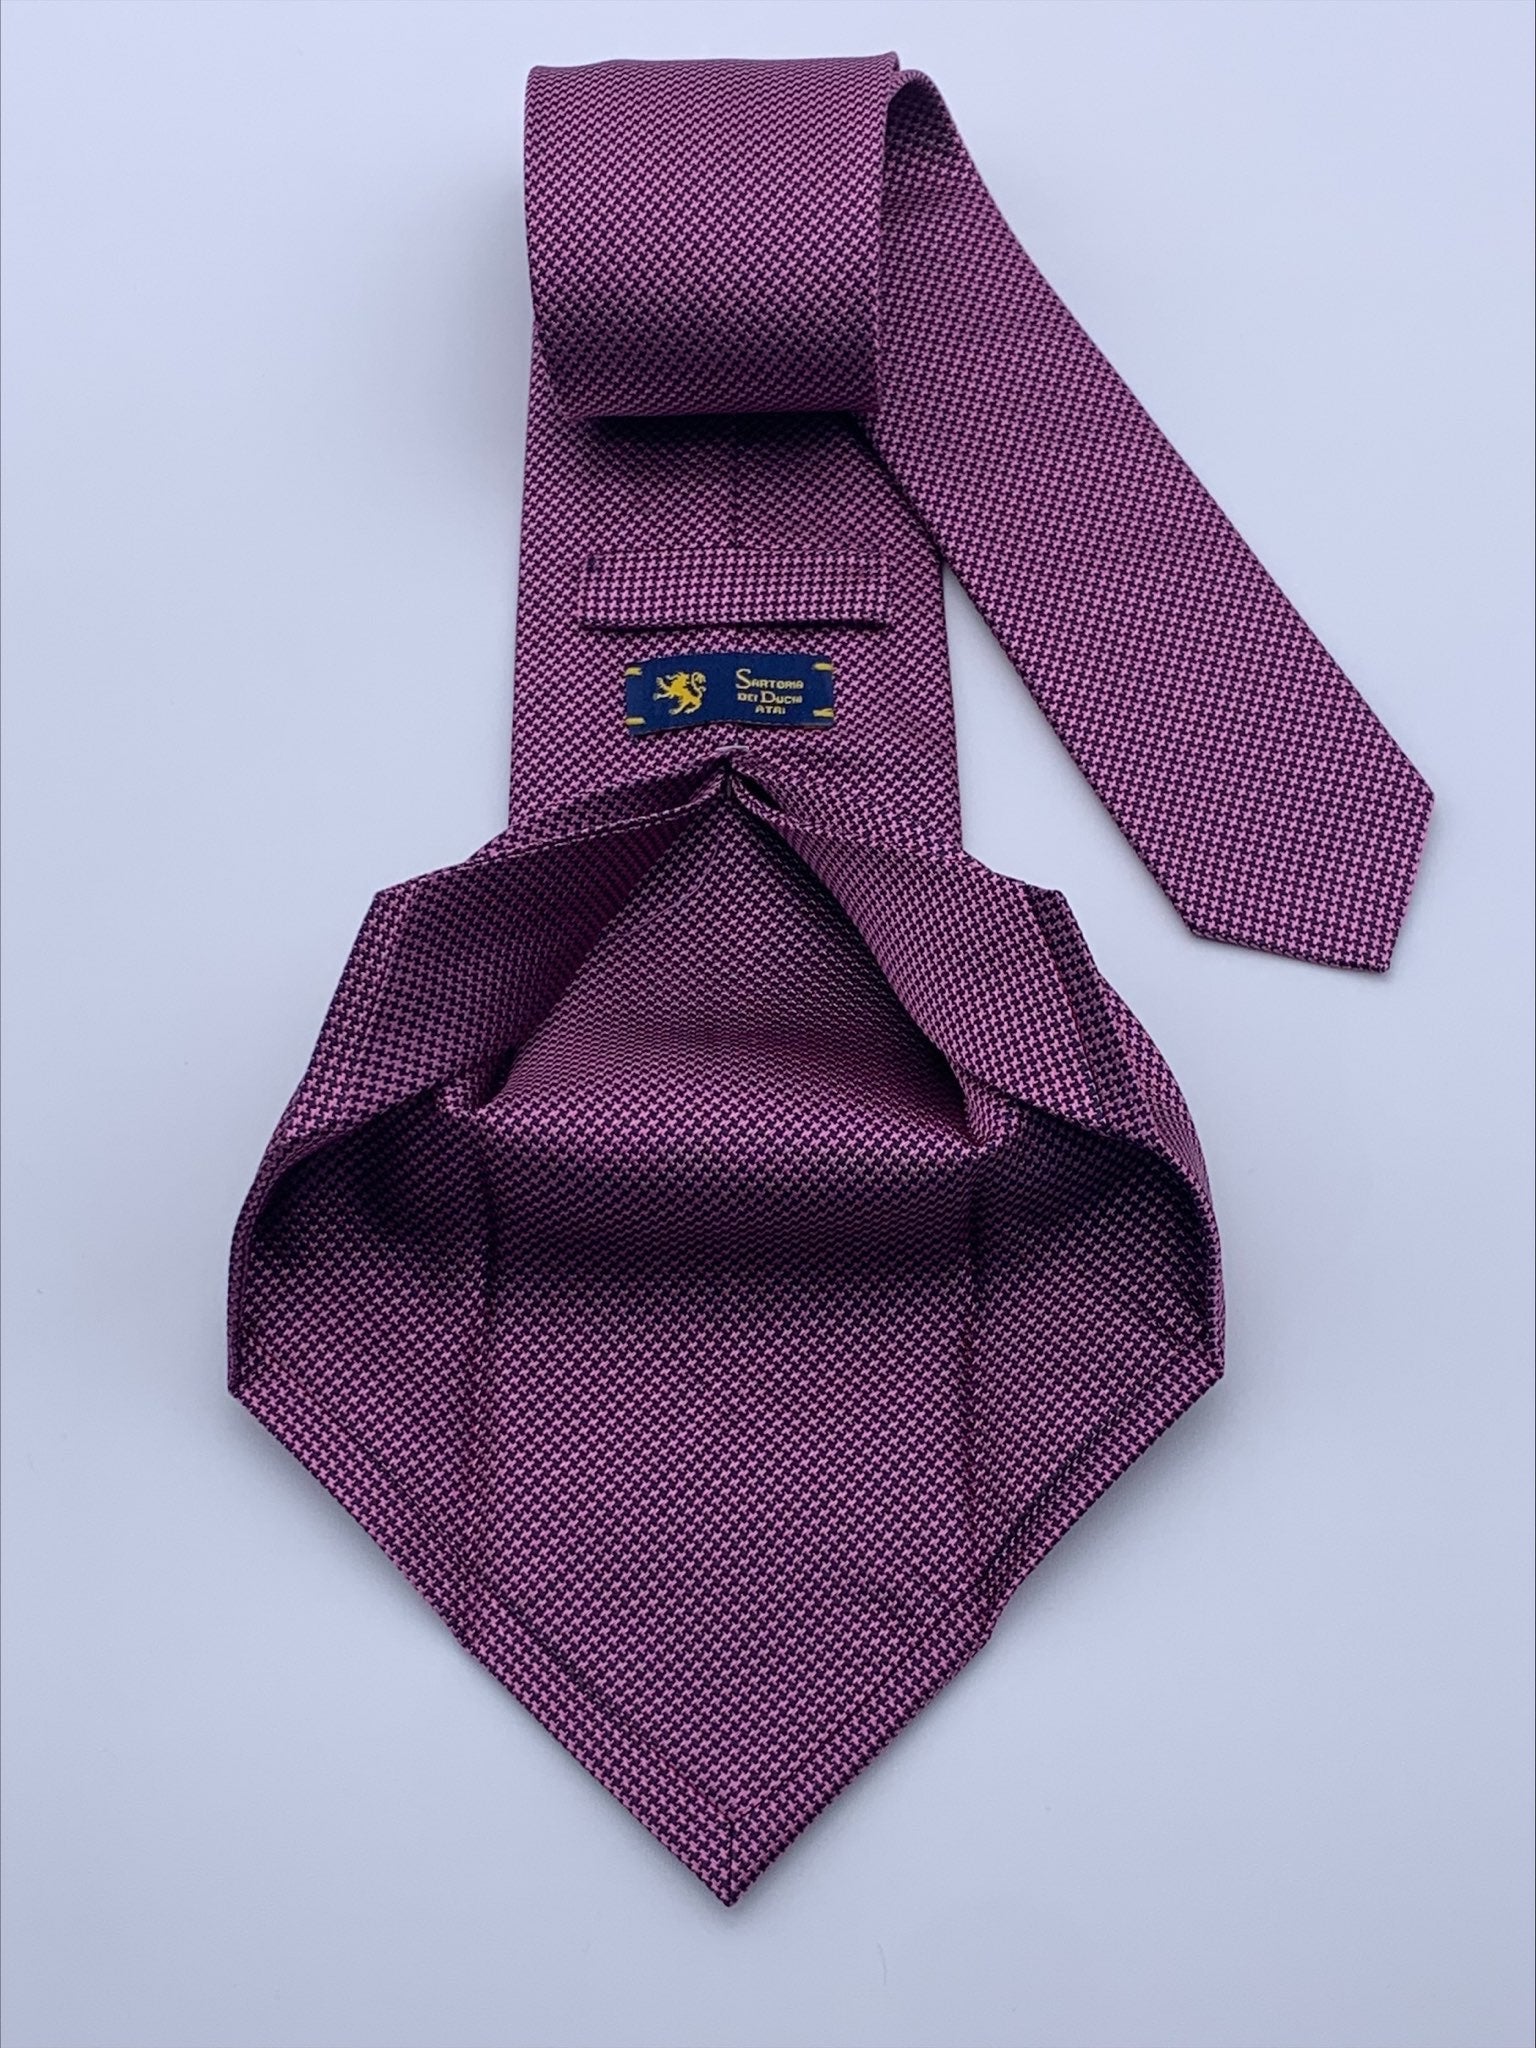 Pure silk seven fold tie.Handmade by our Italian tailors.100% Pure silk.Our ties standard width is 8 cm (3.15 inch), standard length is 150 cm (59 inch) |Sartoria Dei Duchi-Atri